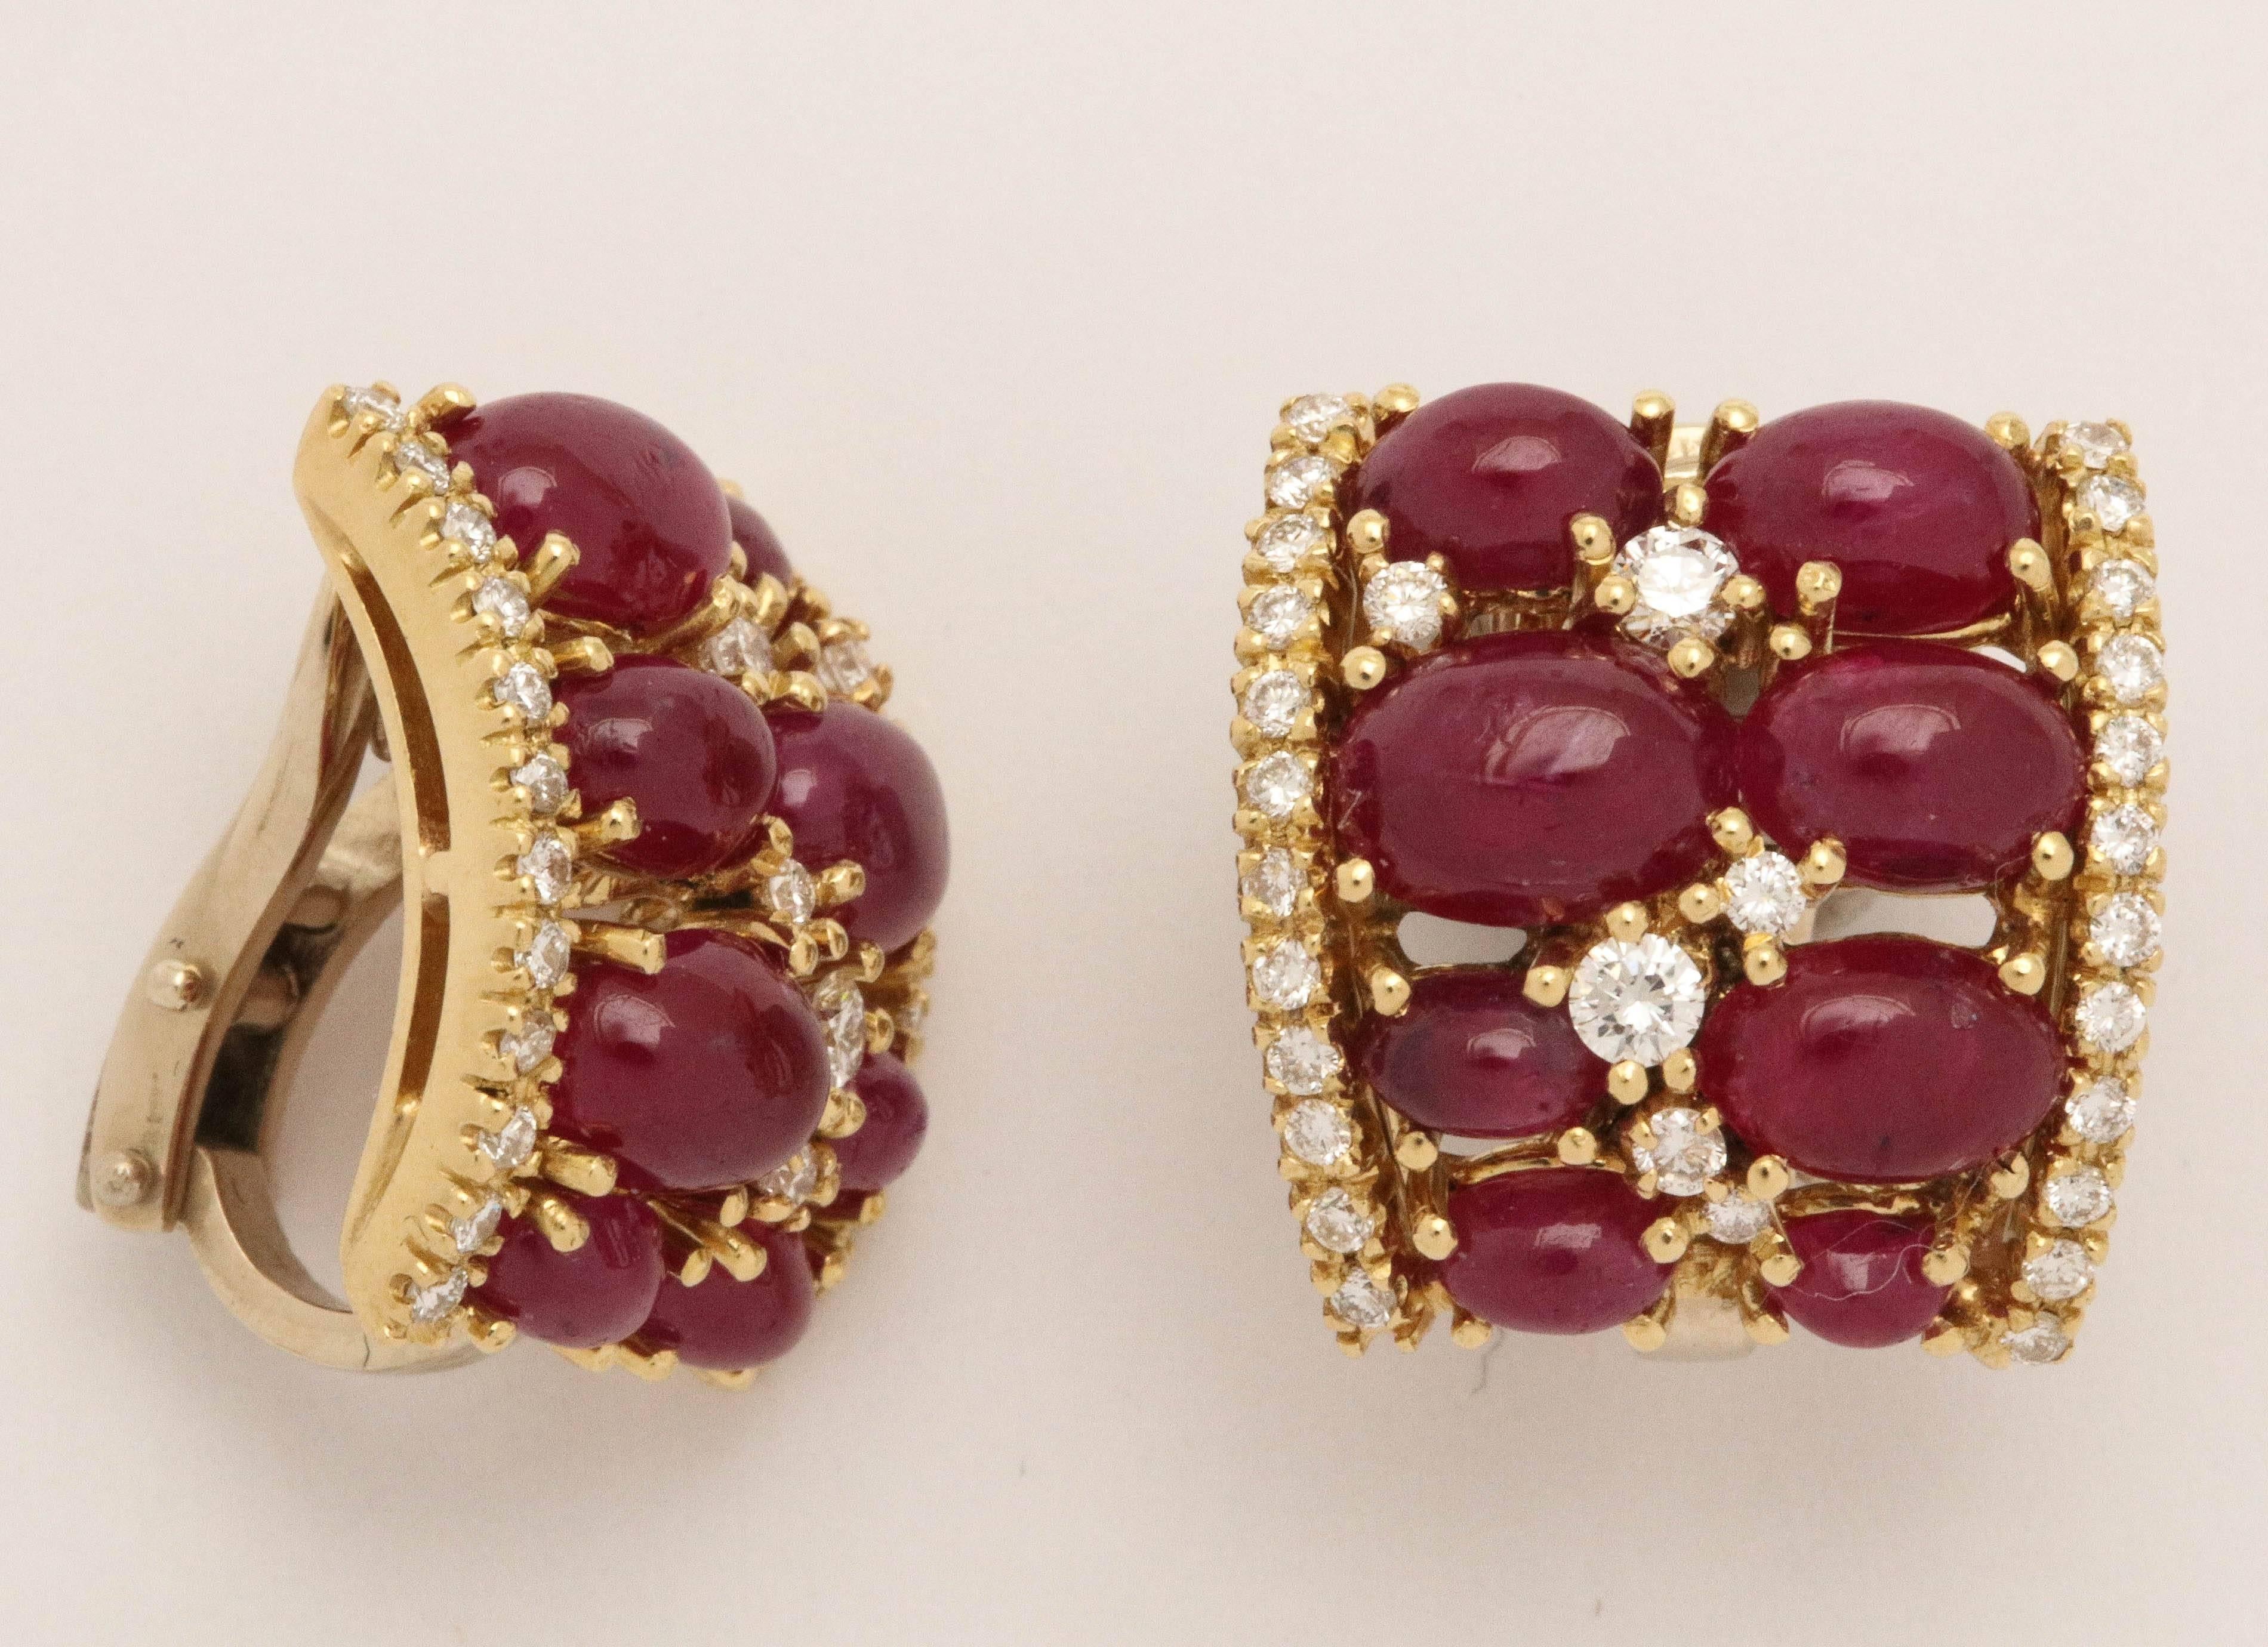 Opulent Cabochon Burma Ruby & Diamond Earrings set in 18kt Yellow Gold.
Hugging close to the Ear and bordered on each side by a row of Diamonds while having five diamonds sprinkled amongst the Rubies. A garden vision!
Wow - what a look.  Full of